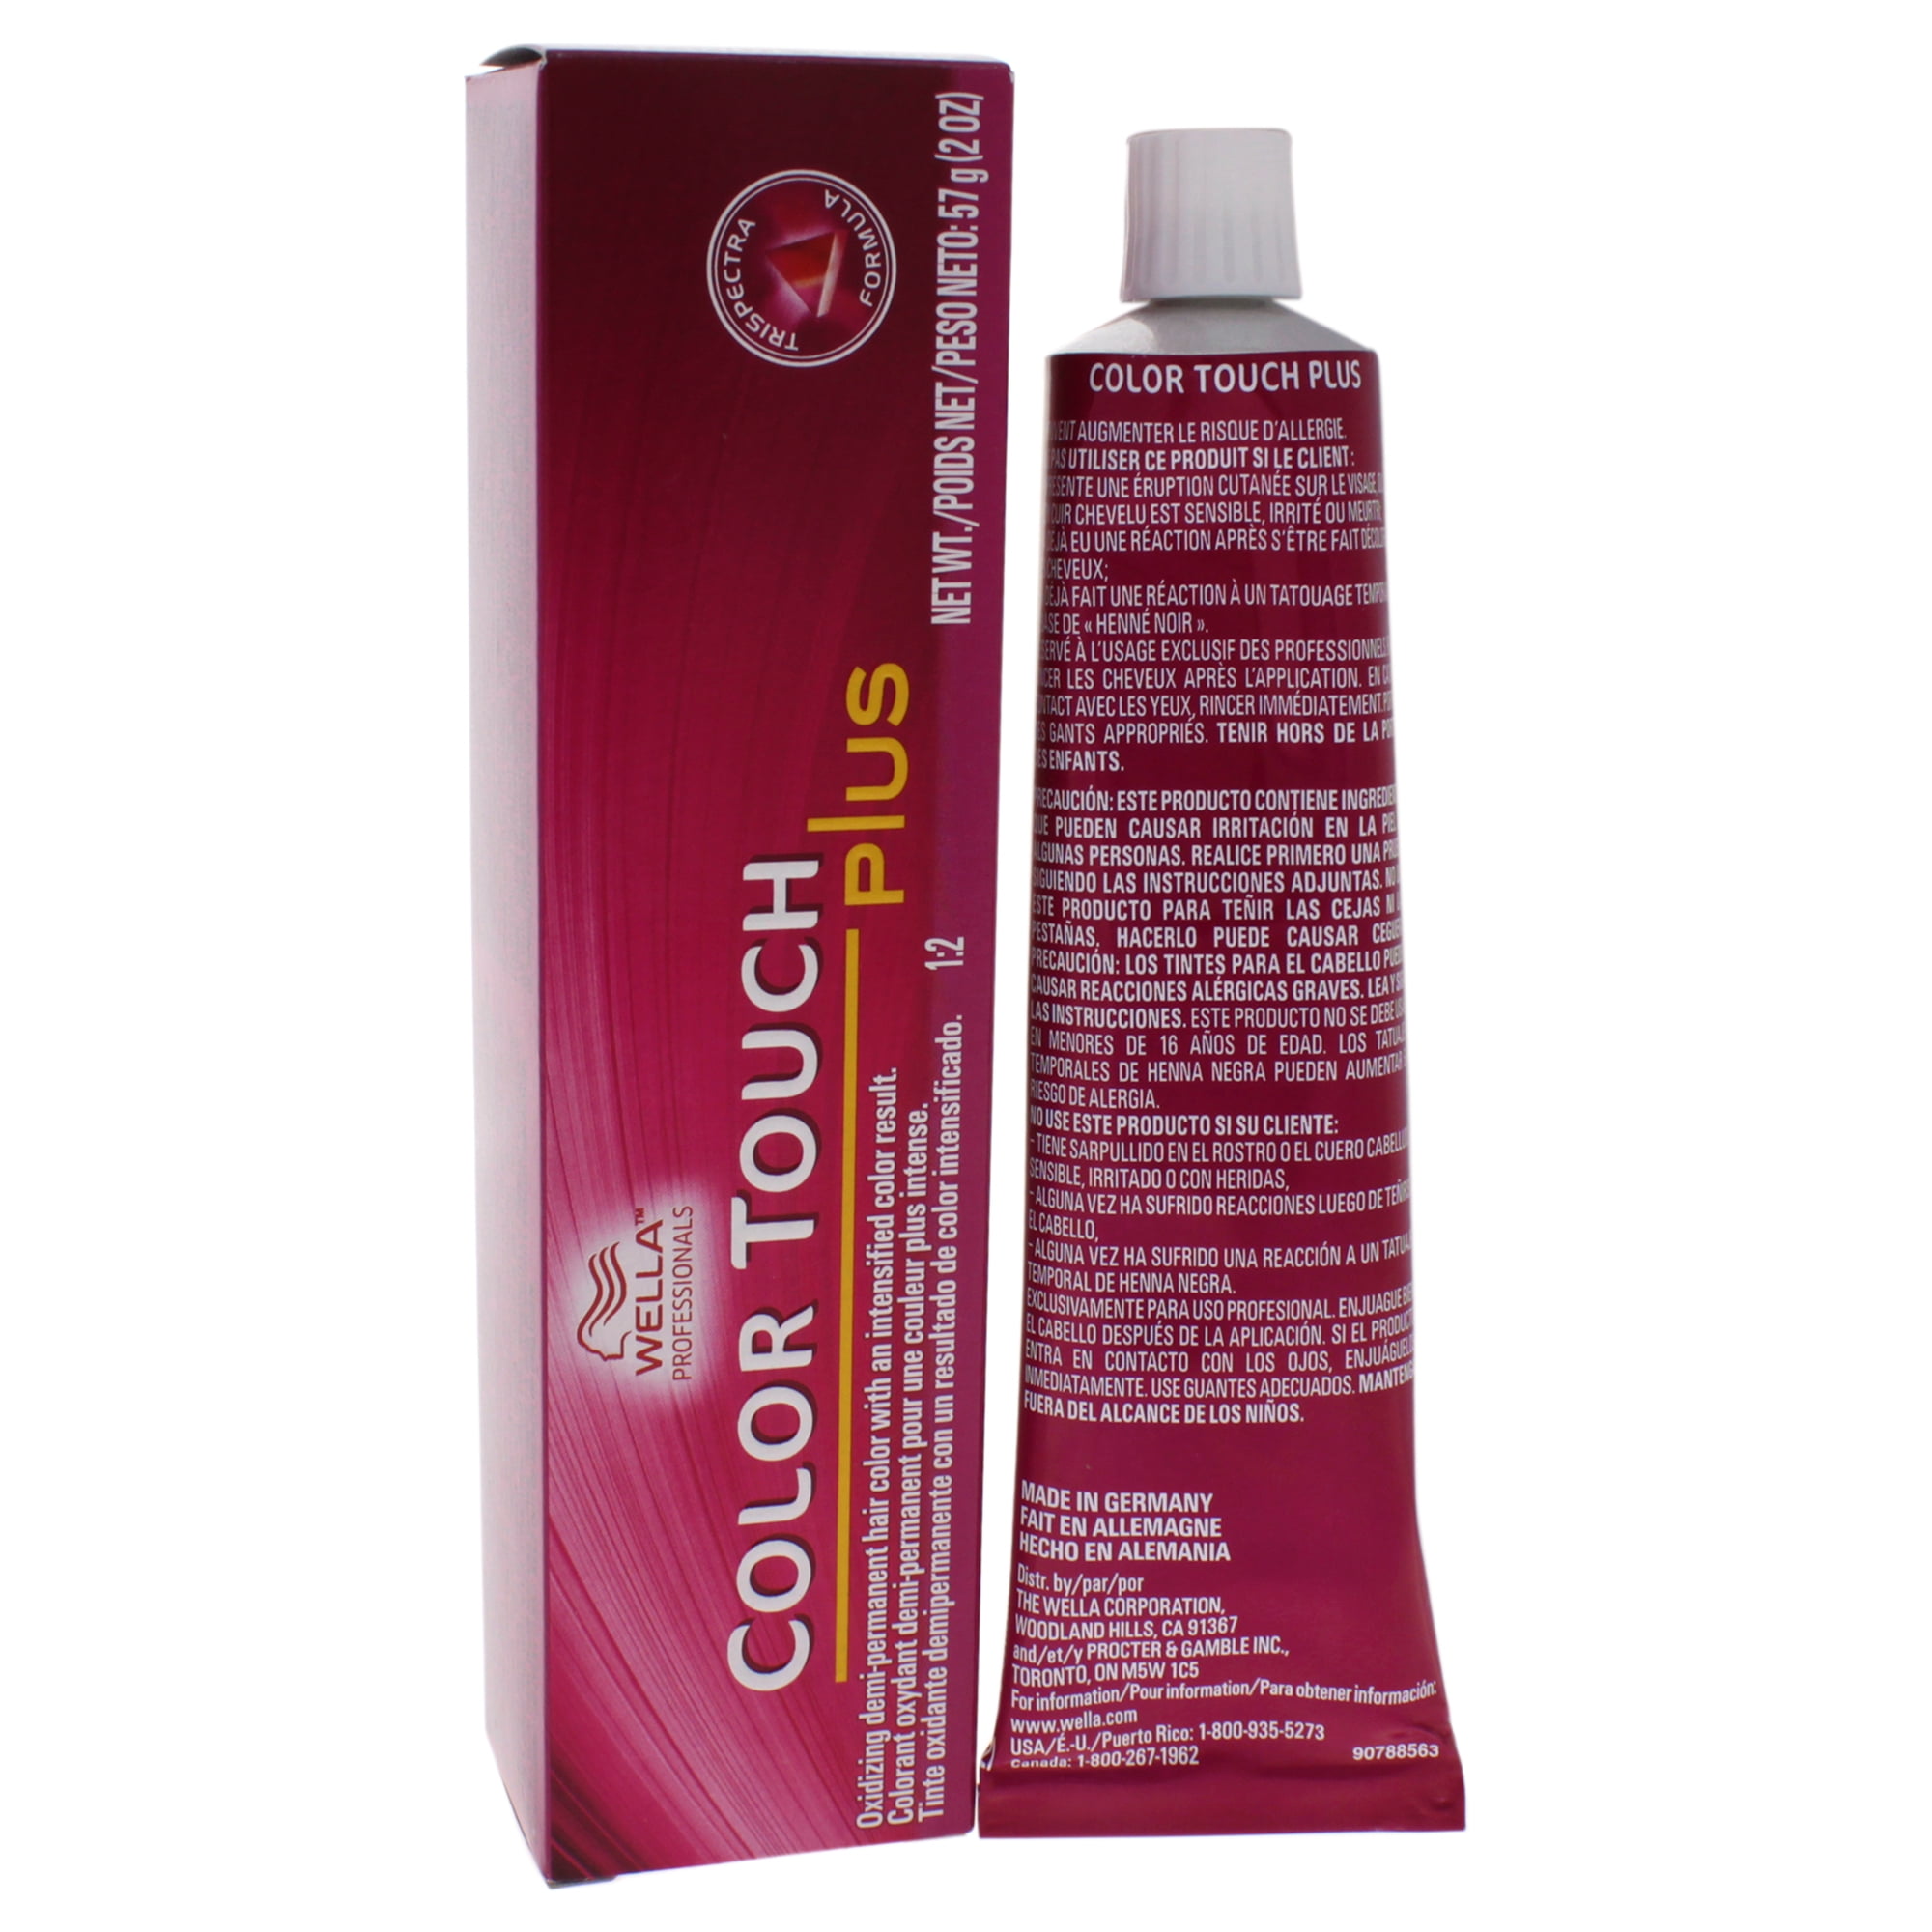 laag met tijd Boomgaard Wella Color Touch Plus Haircolor - 88/07 Intense Light Blonde/Natural Brown  - 2 oz Hair Color - Walmart.com